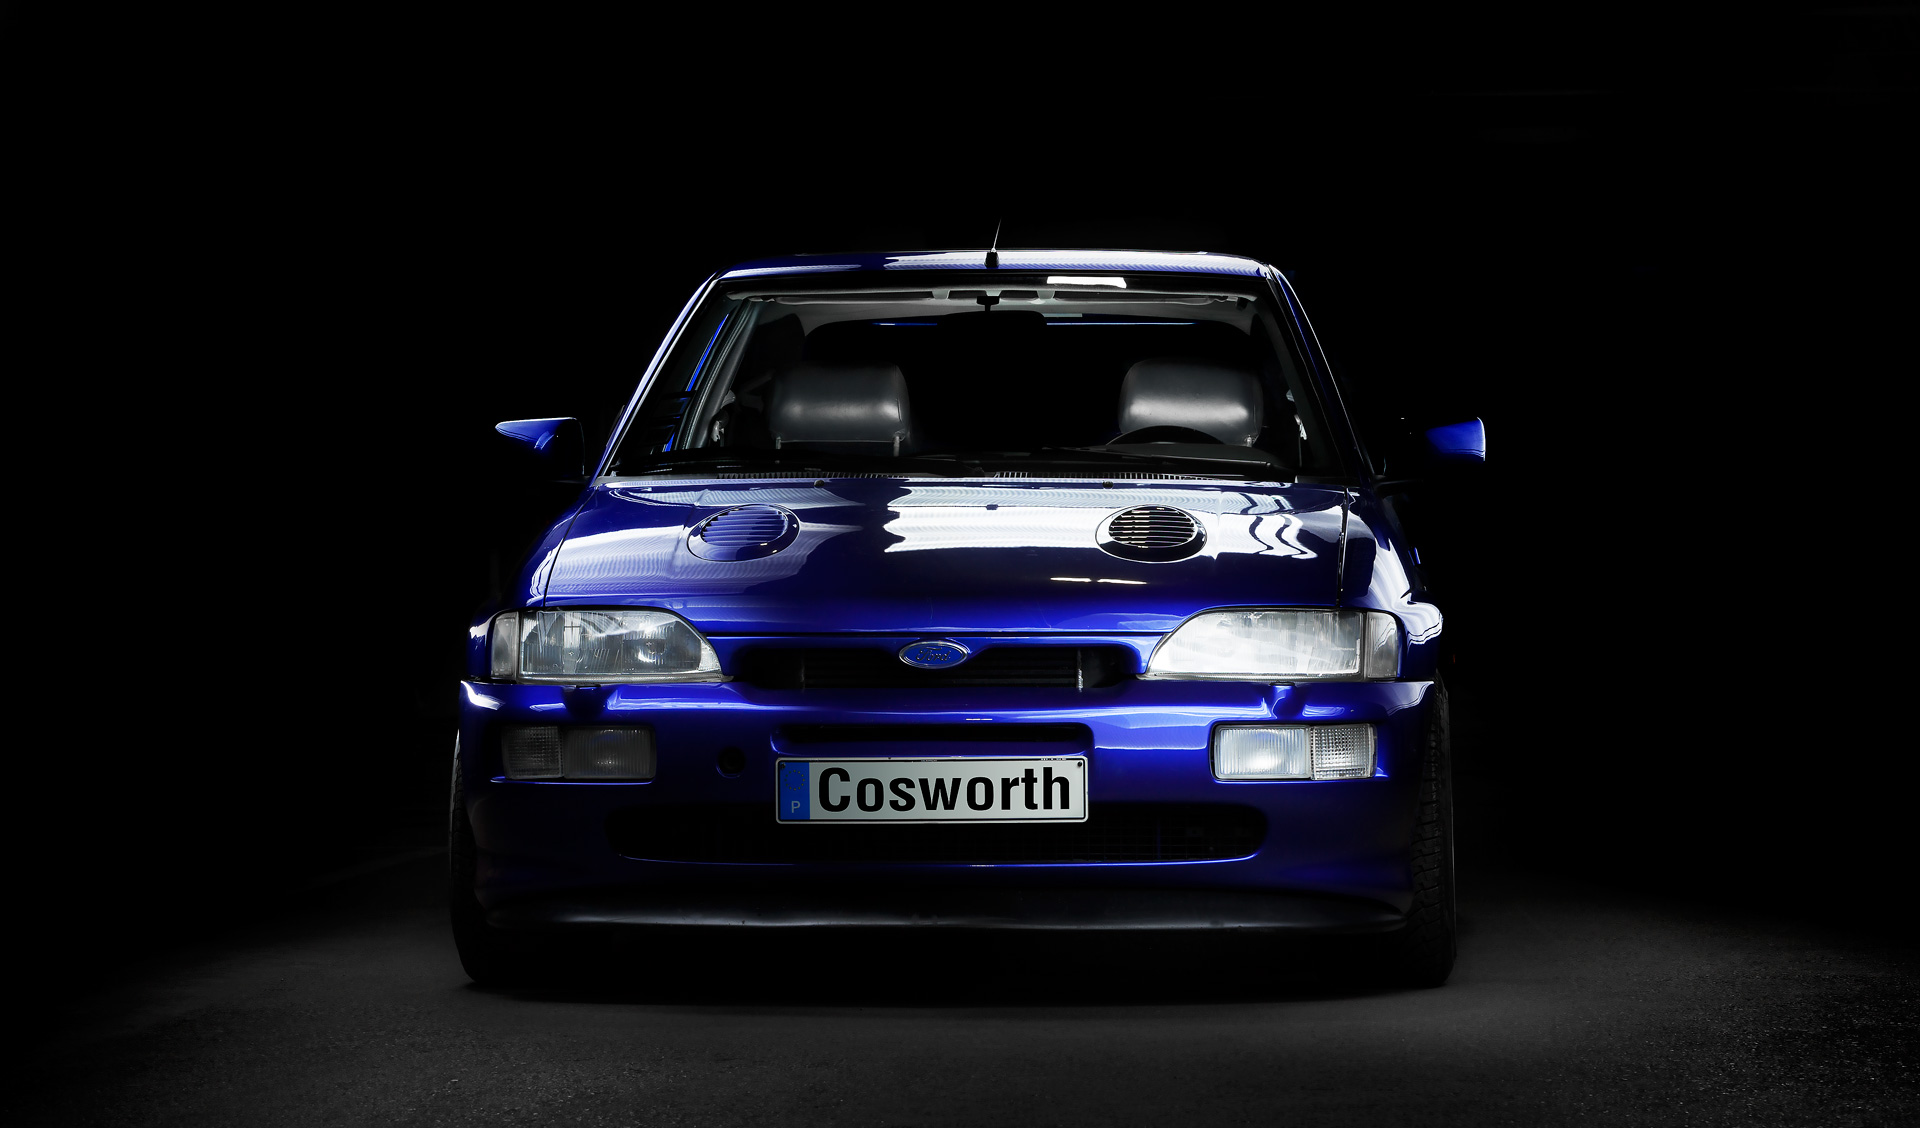 Ford Ford Escort Cosworth Blue Cars English Cars Race Cars Rally Rally Cars Retro Car 1920x1128